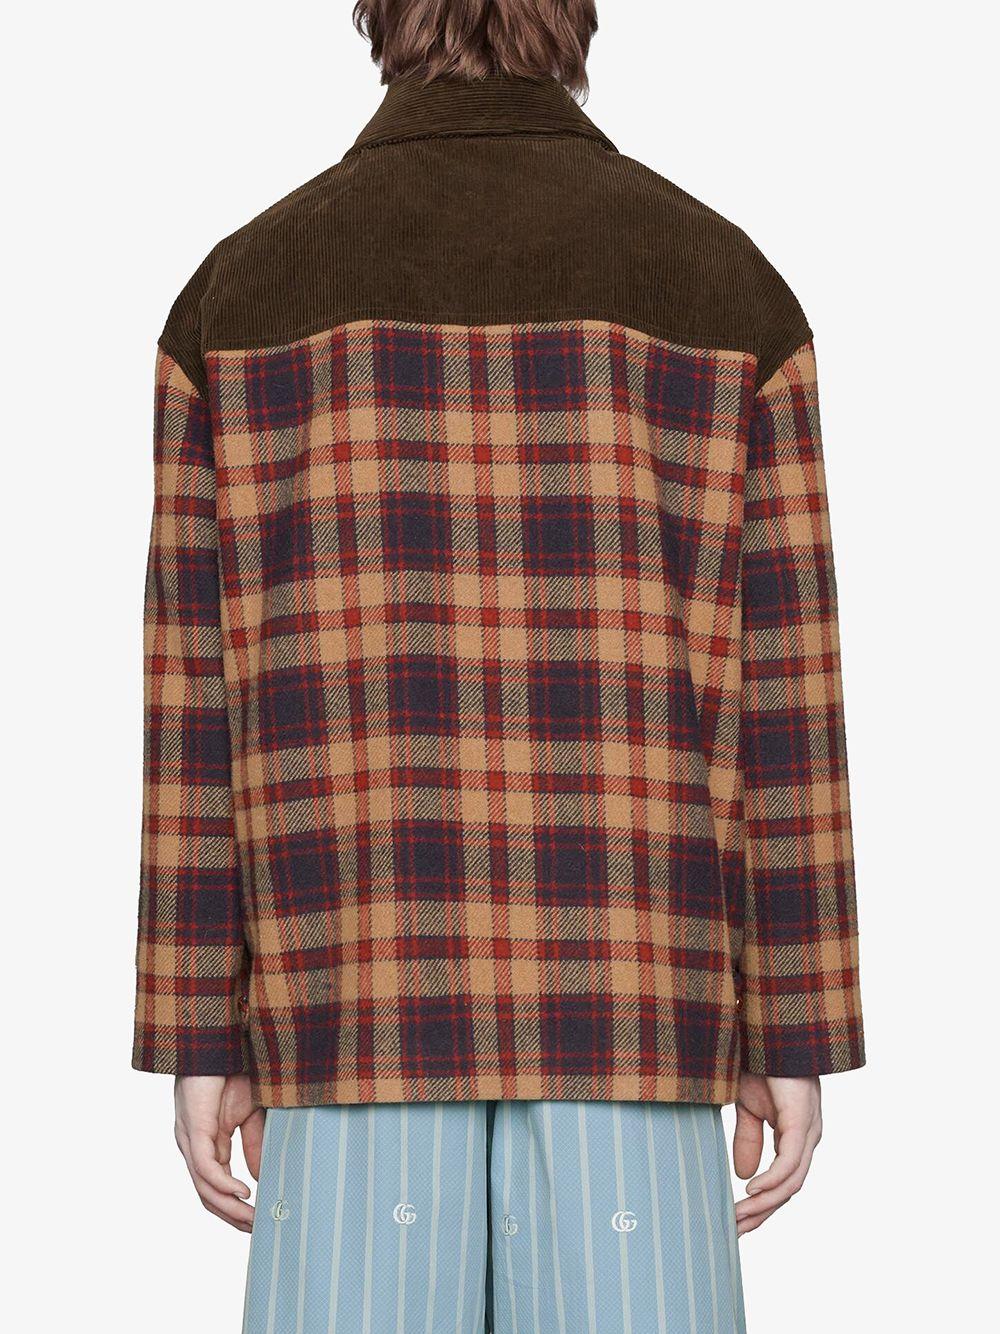 Gucci Plaid-pattern Shirt Jacket in Brown for Men | Lyst